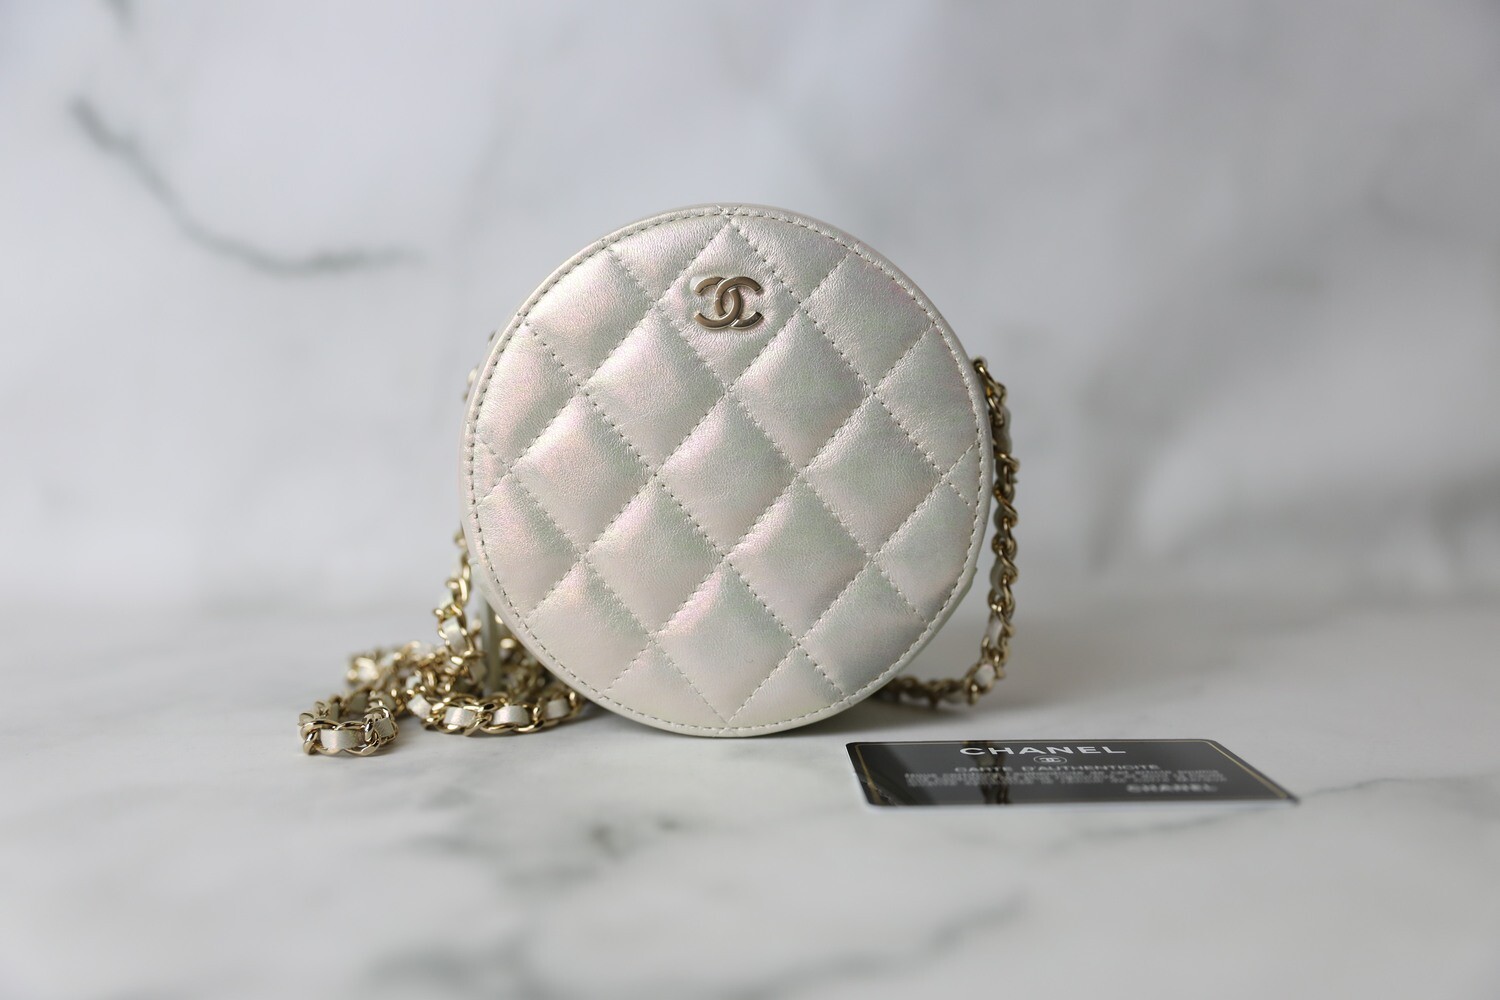 Chanel Round Crossbody, Pearl Iridescent lambskin with Gold Hardware. New  in Dustbag